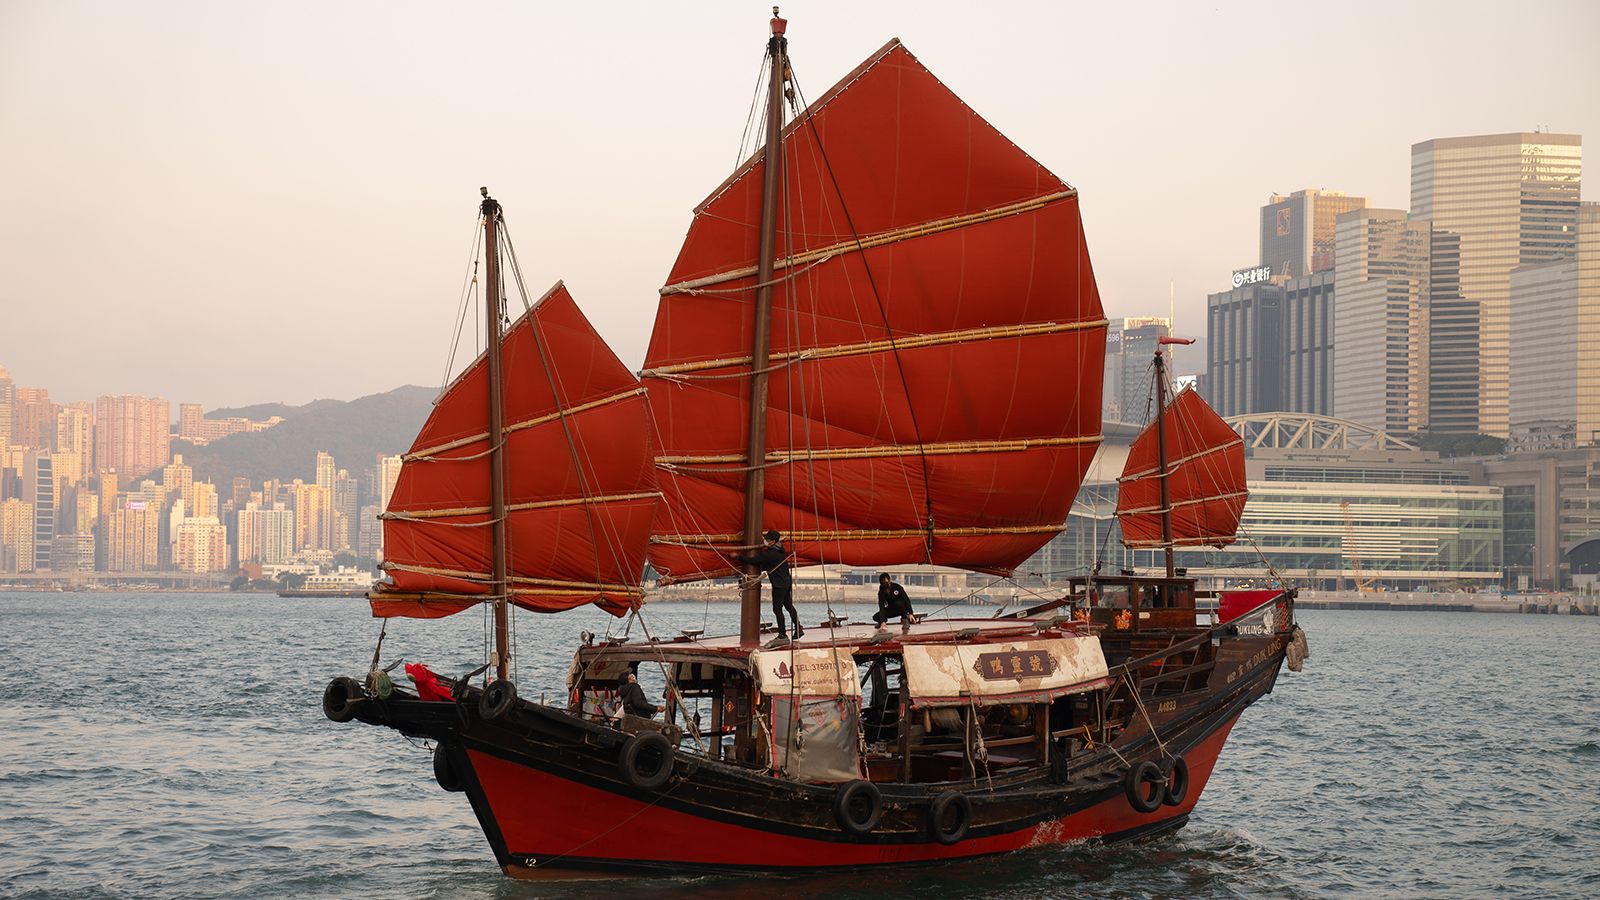 All aboard the Dukling: How the junk boat became a Hong Kong icon | CNN